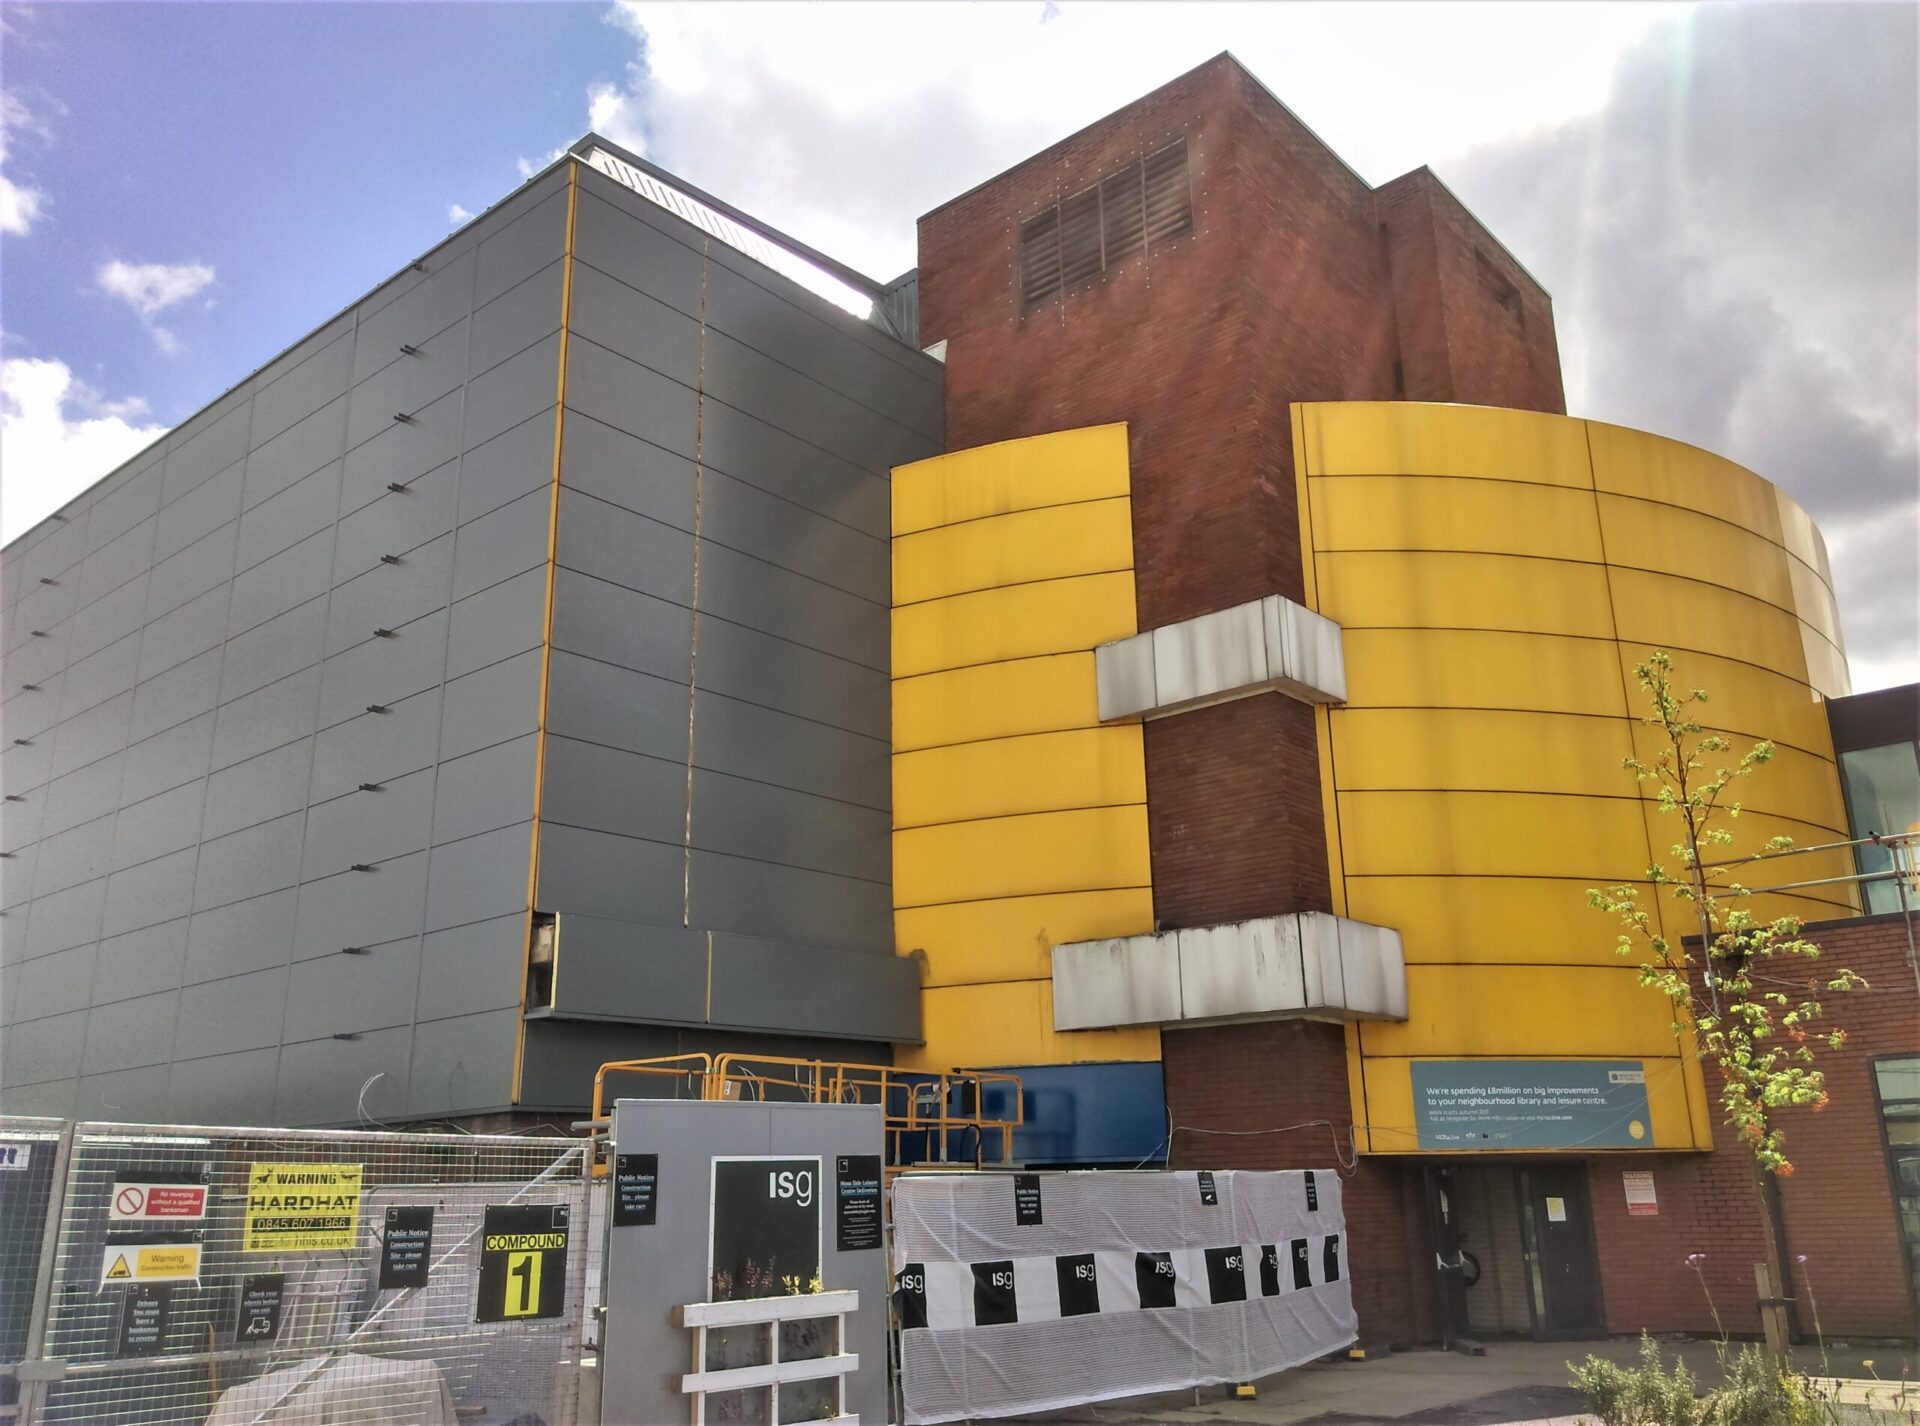 The yellow cladding is due to be repainted blue